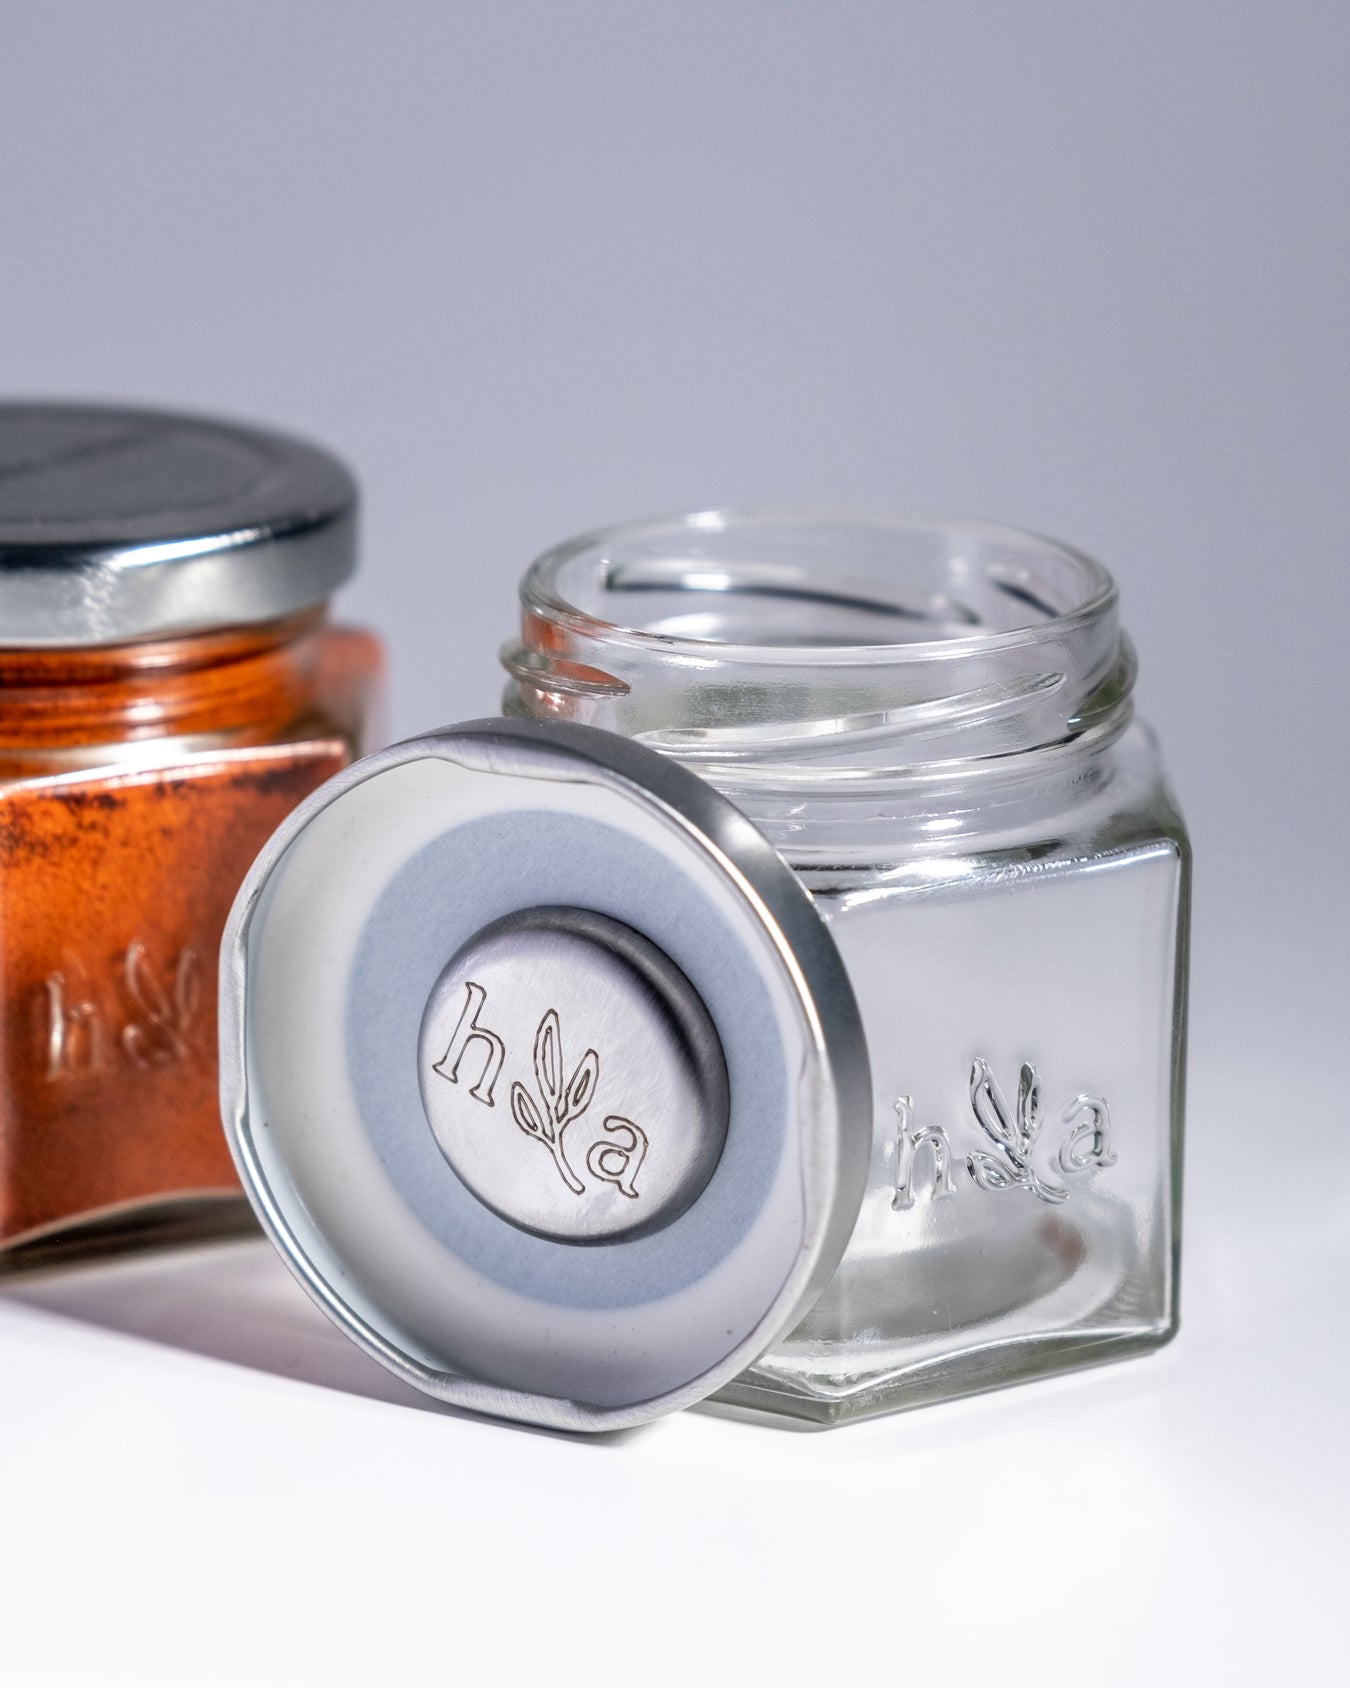 Here & After Use and Refill Jars